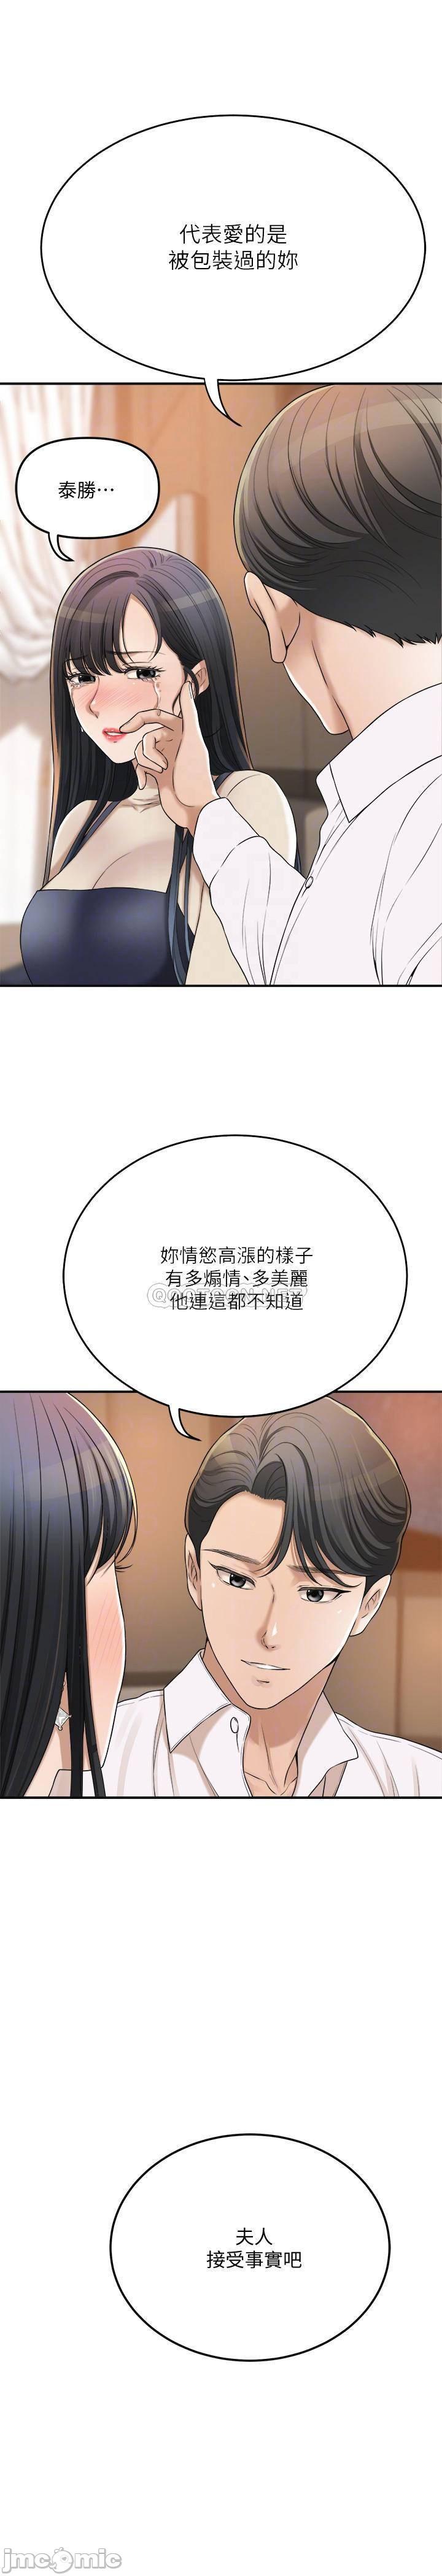 Cum In Mouth 抑欲人妻41-50（完结） Tgirl - Page 8